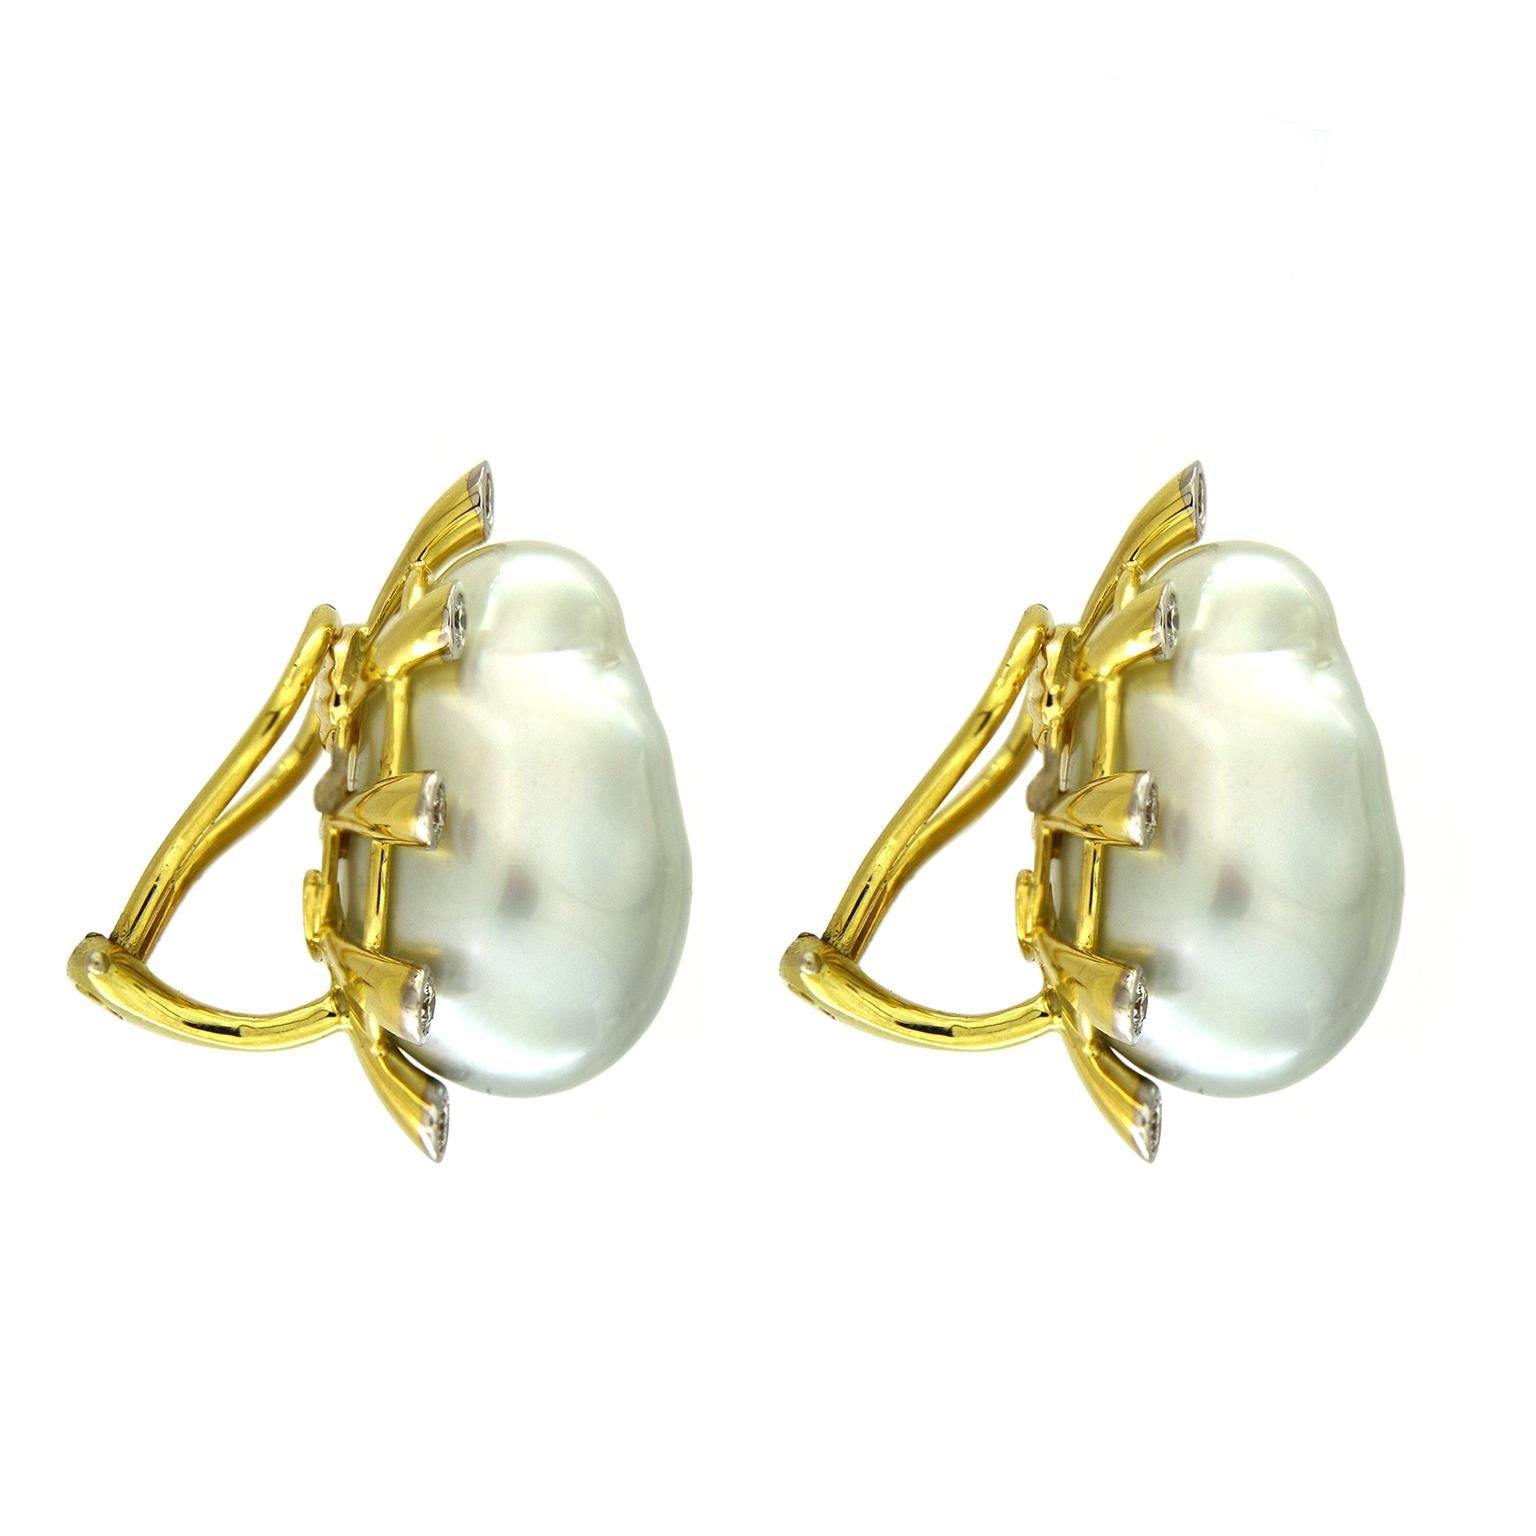 Valentin Magro Baroque Pearl and Diamond Studs shine with two kinds of luster. In the center are baroque South Sea pearls. Light scatters along the upper layers of the gems, creating unique gleam and shadows. Round brilliant cut diamonds rest at